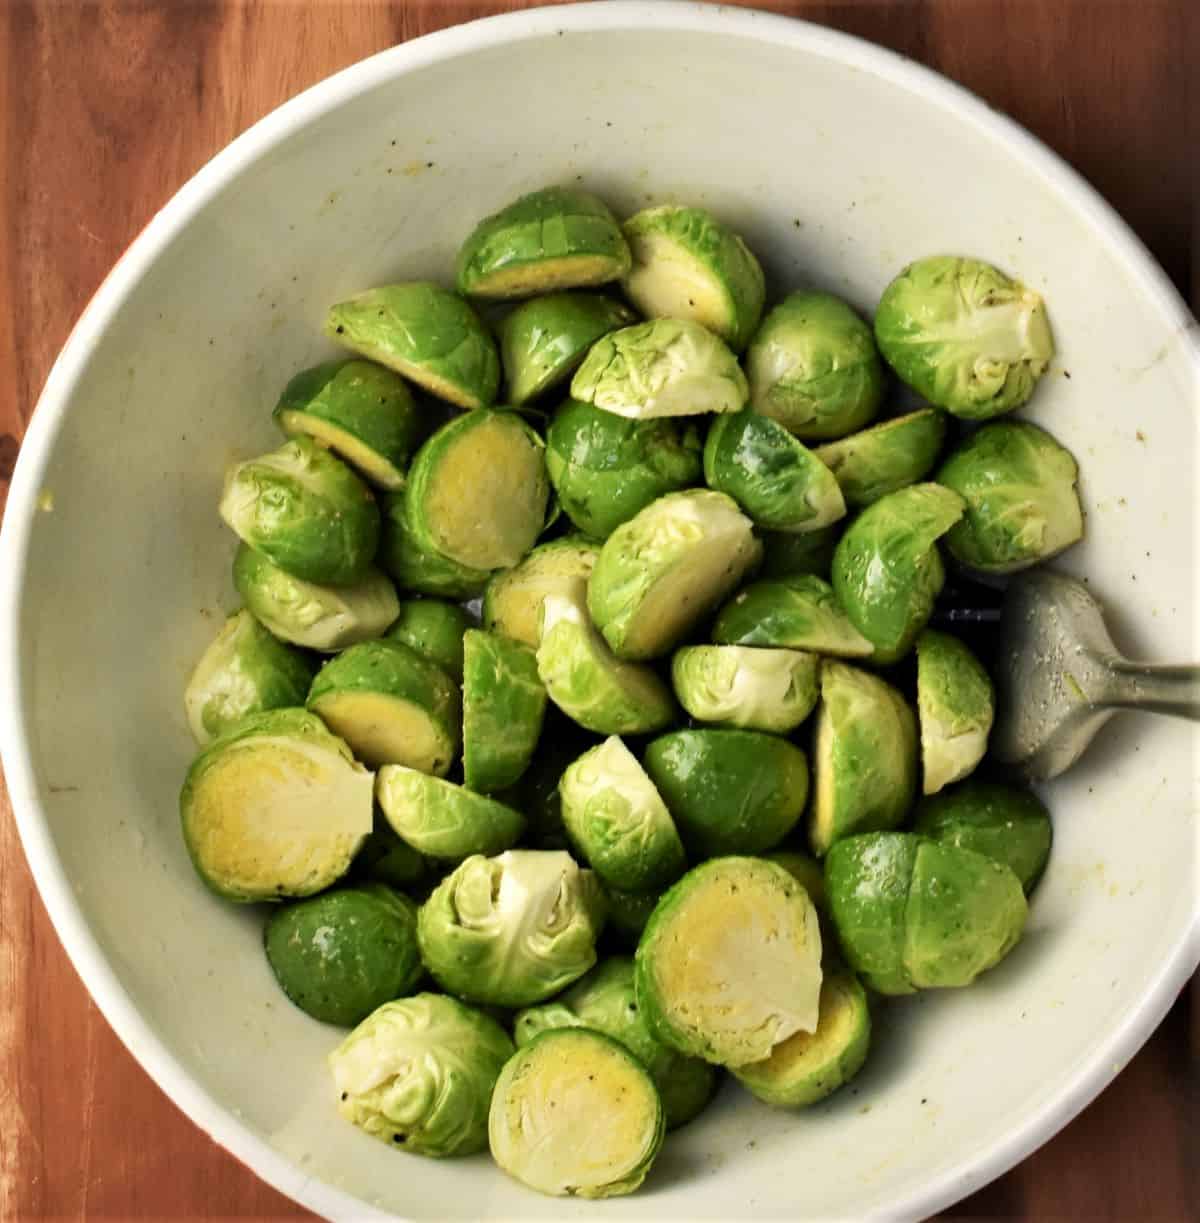 Halved brussels sprouts coated in oil in white bowl.